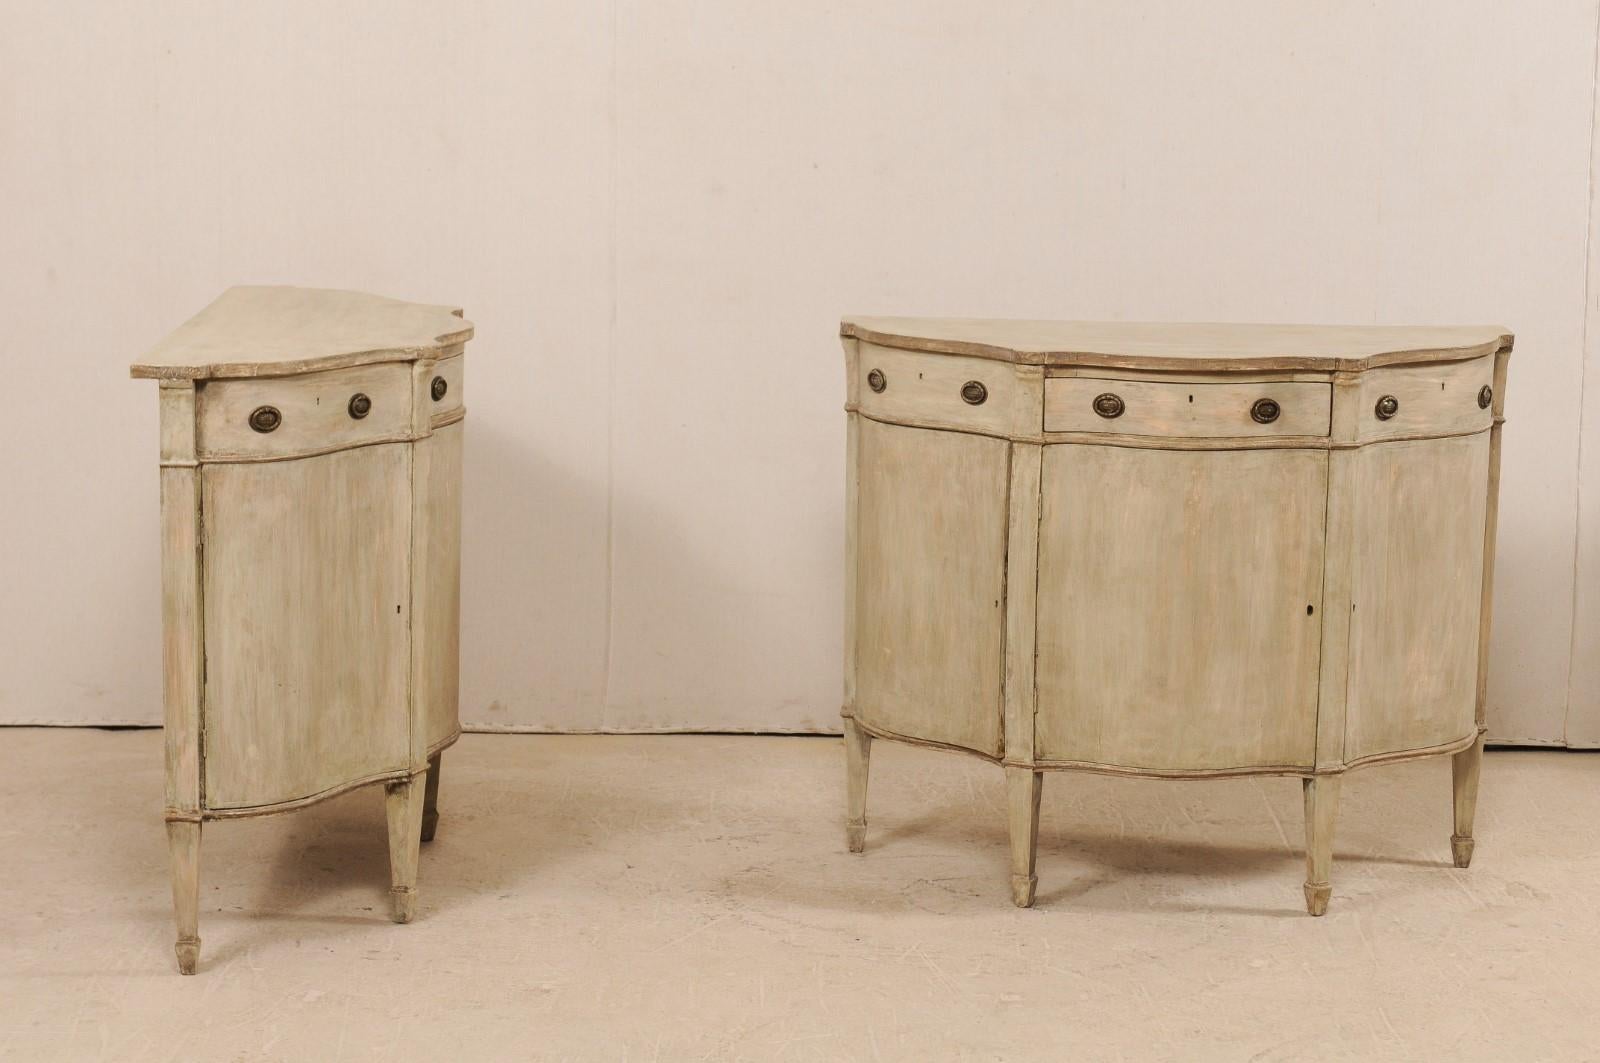 Carved Pair of Italian Early 20th Century Painted Wood Demilune Console Chests